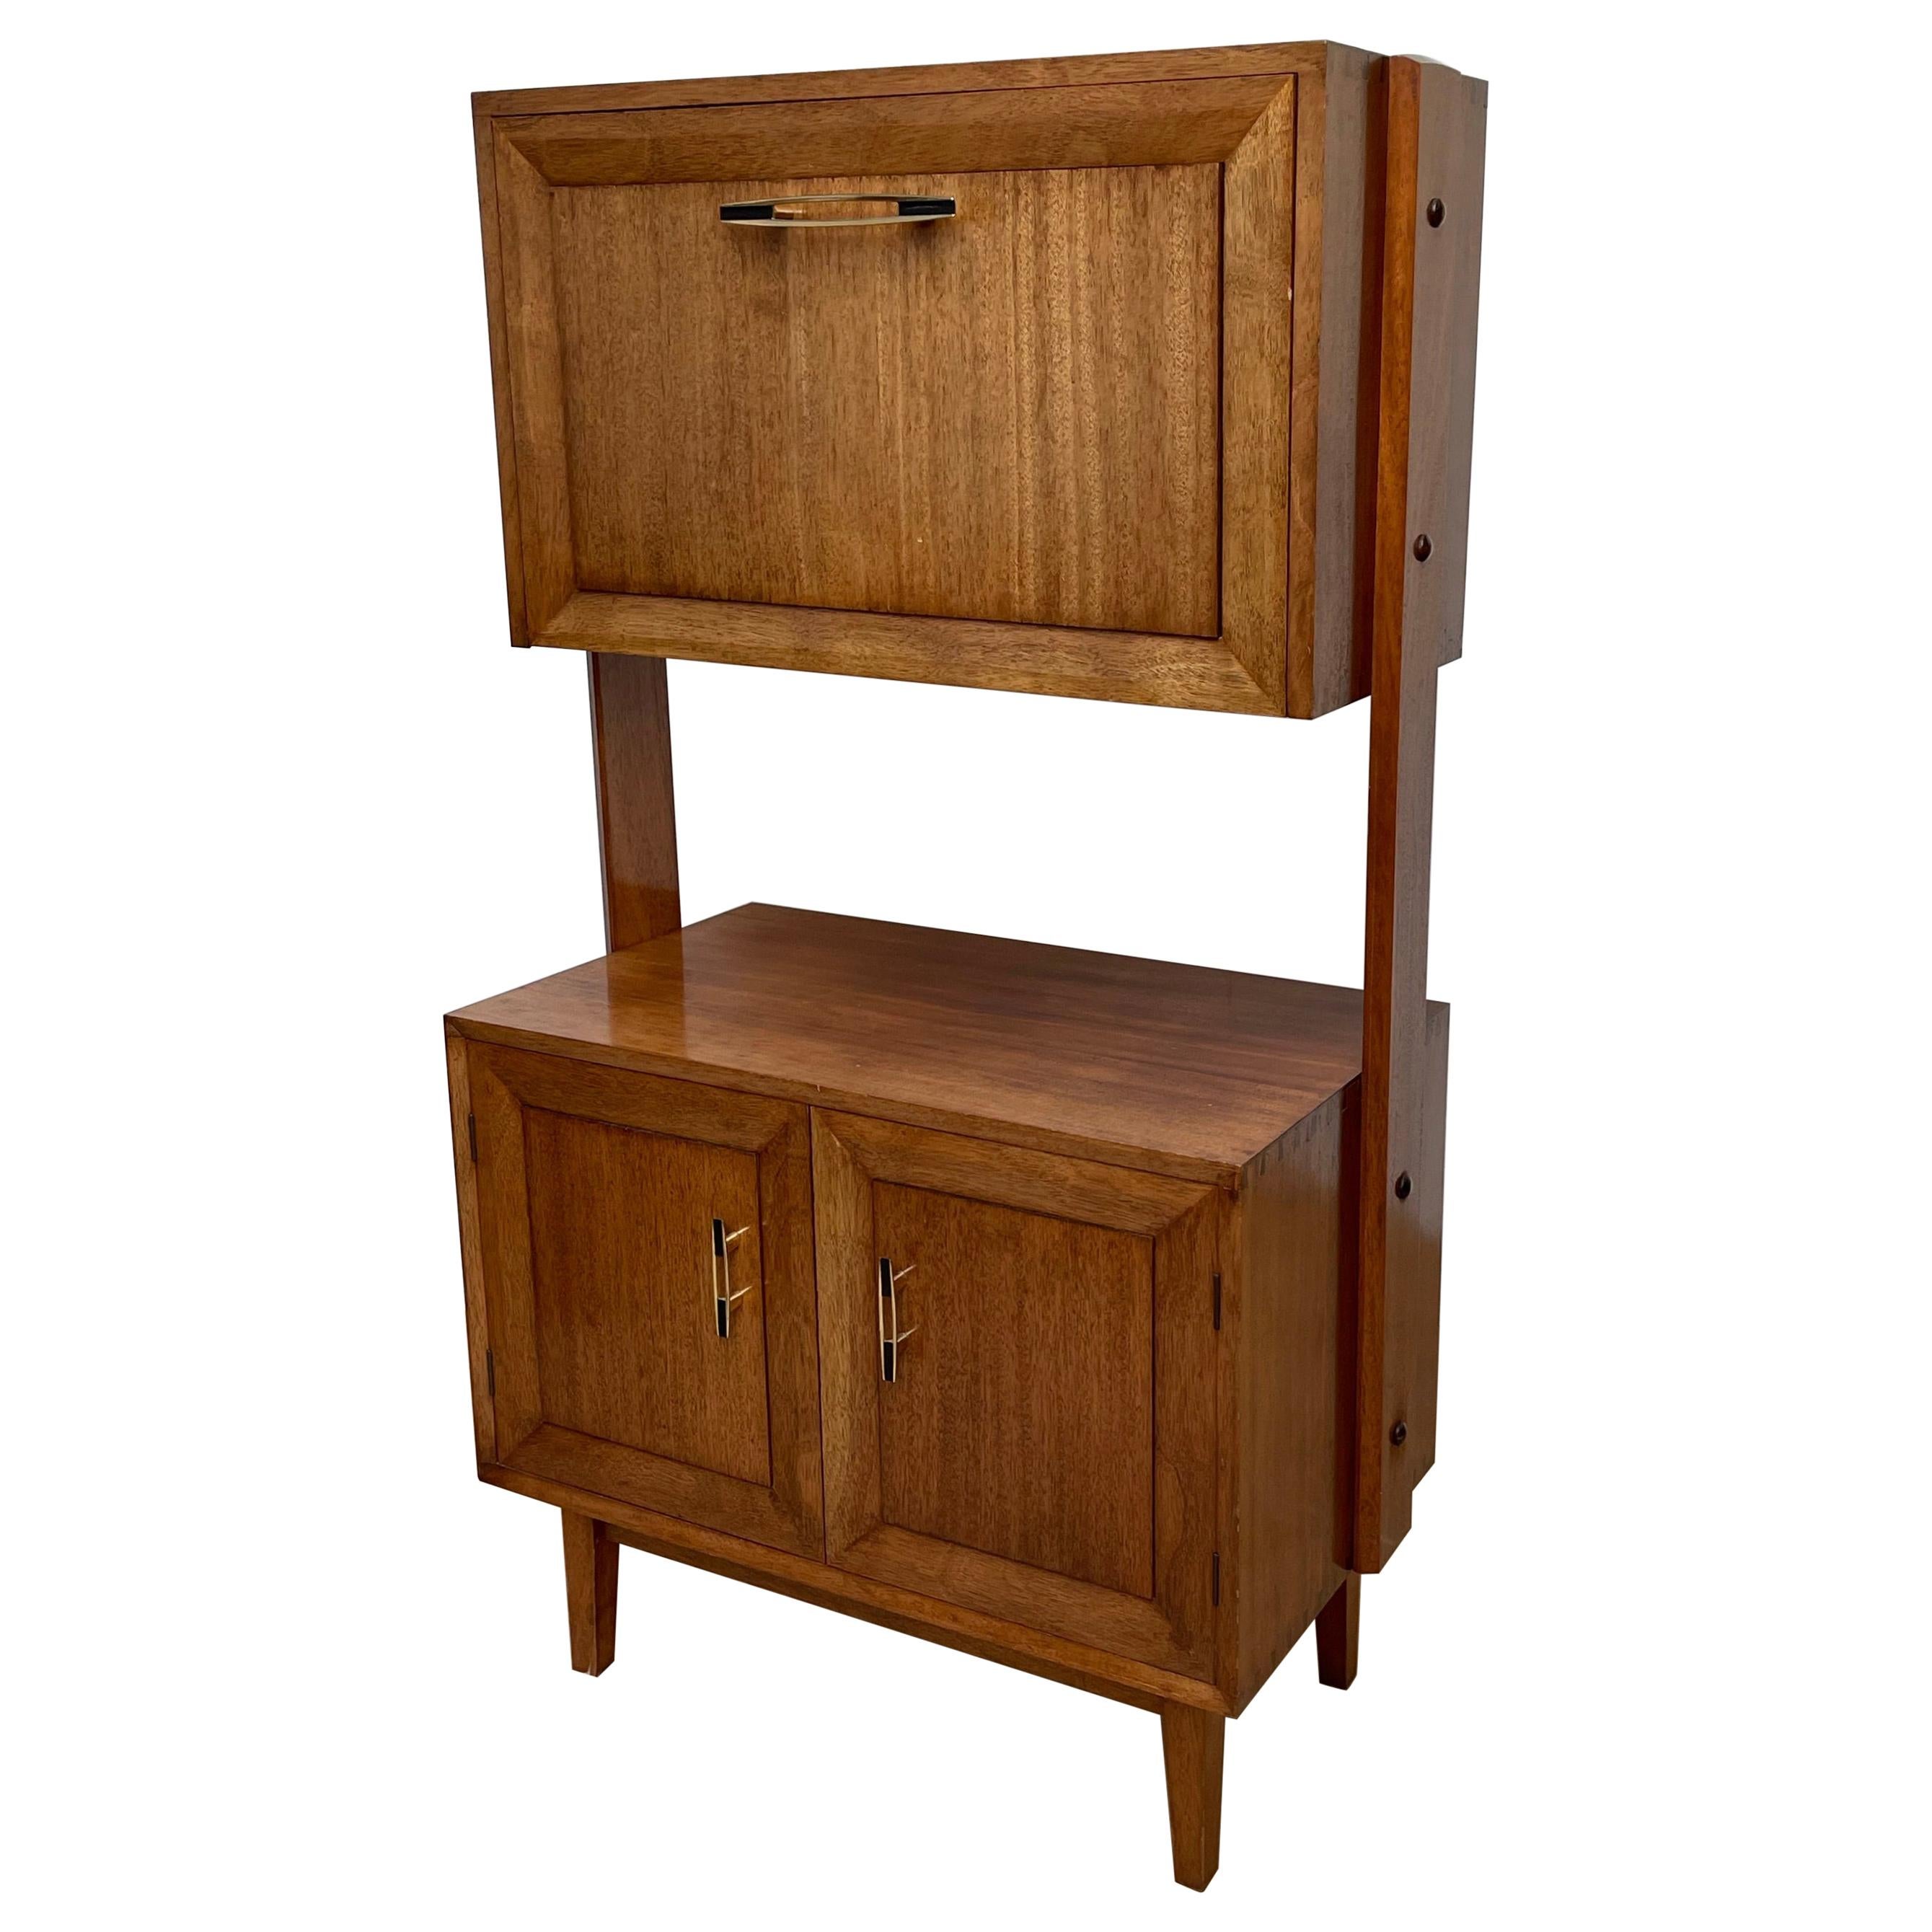 Great Quality Midcentury Modern Solid Teak Wood Drinks Cabinet or Dry Bar, 1960s